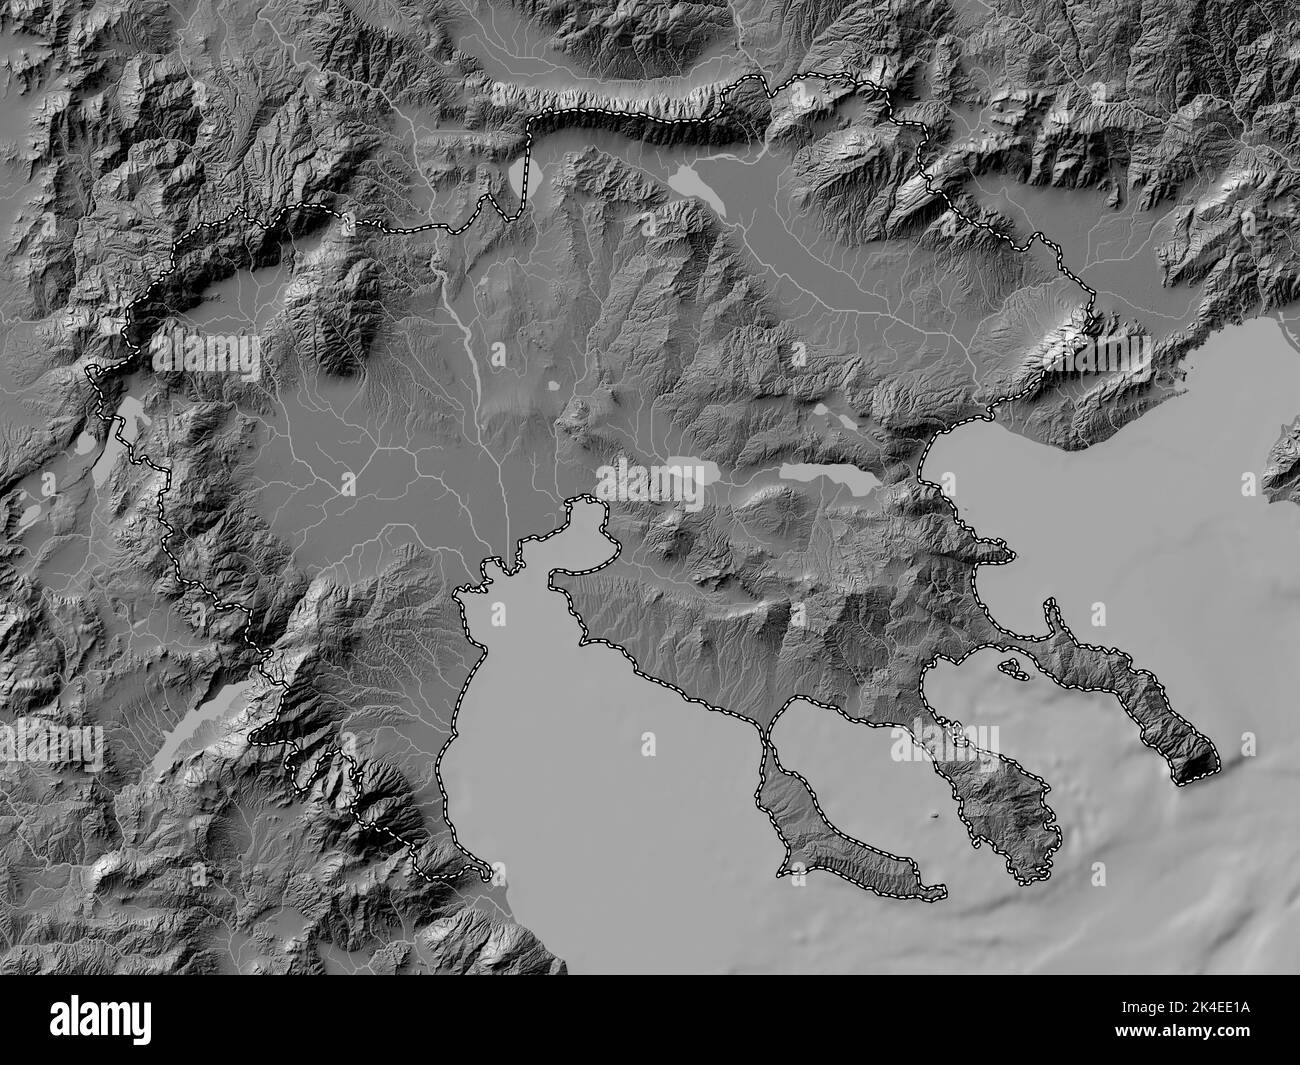 Central Macedonia, decentralized administration of Greece. Bilevel elevation map with lakes and rivers Stock Photo